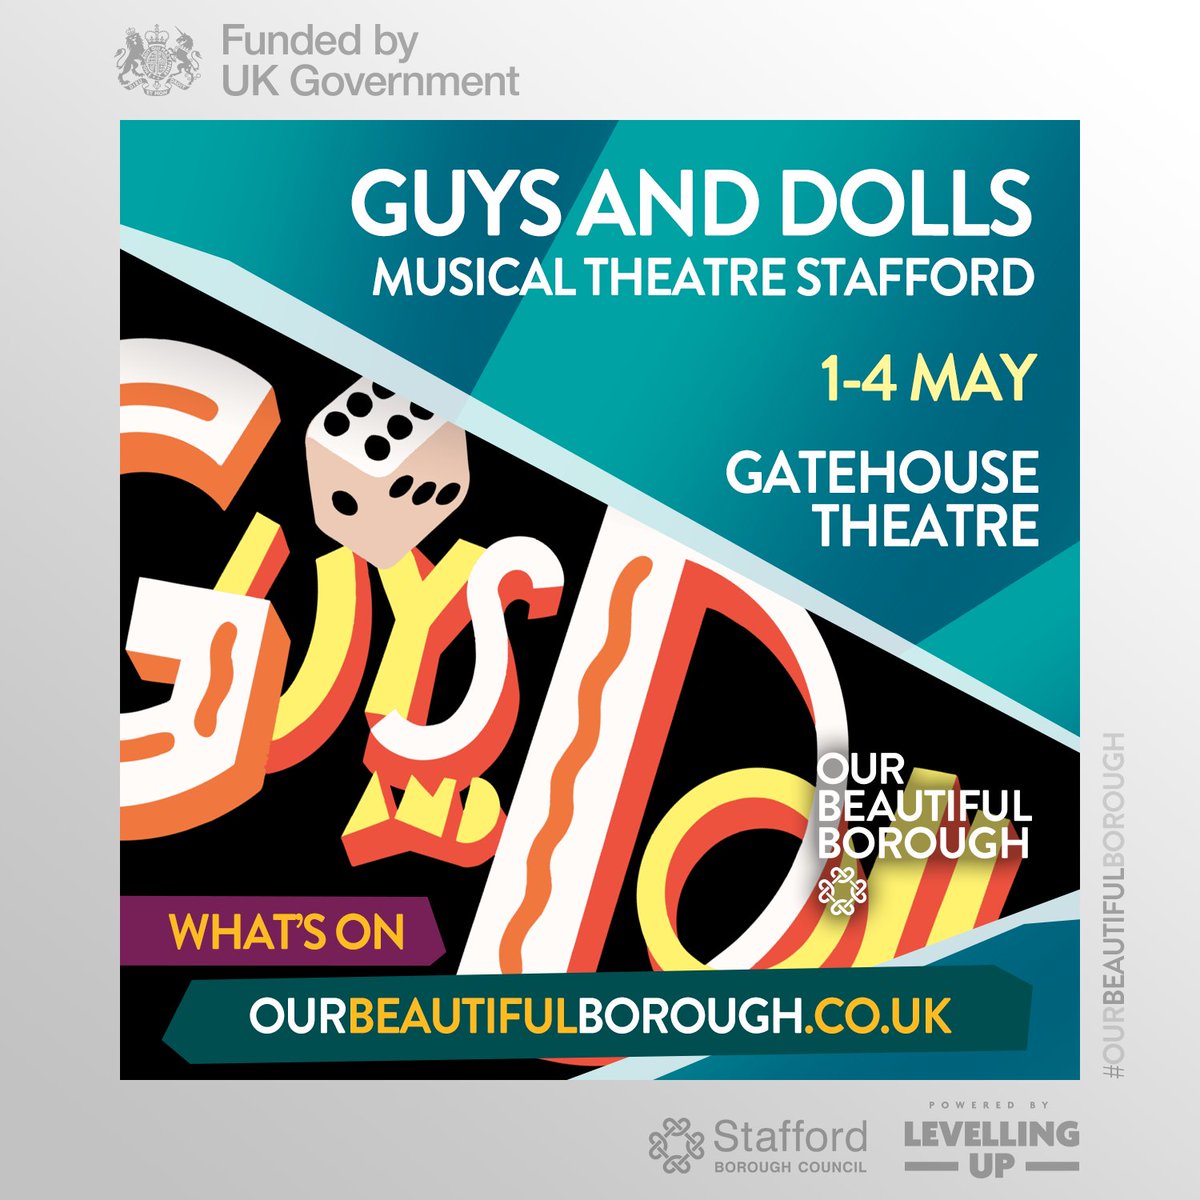 The legendary #MusicalTheatreStafford mark their 100th anniversary of performing at @Staff_Gatehouse 1-4 May with the iconic musical 'Guys And Dolls' – considered by many to be the perfect musical comedy: tinyurl.com/2bexzc4y #NightsOut #PerformingArts #OurBeautifulBorough